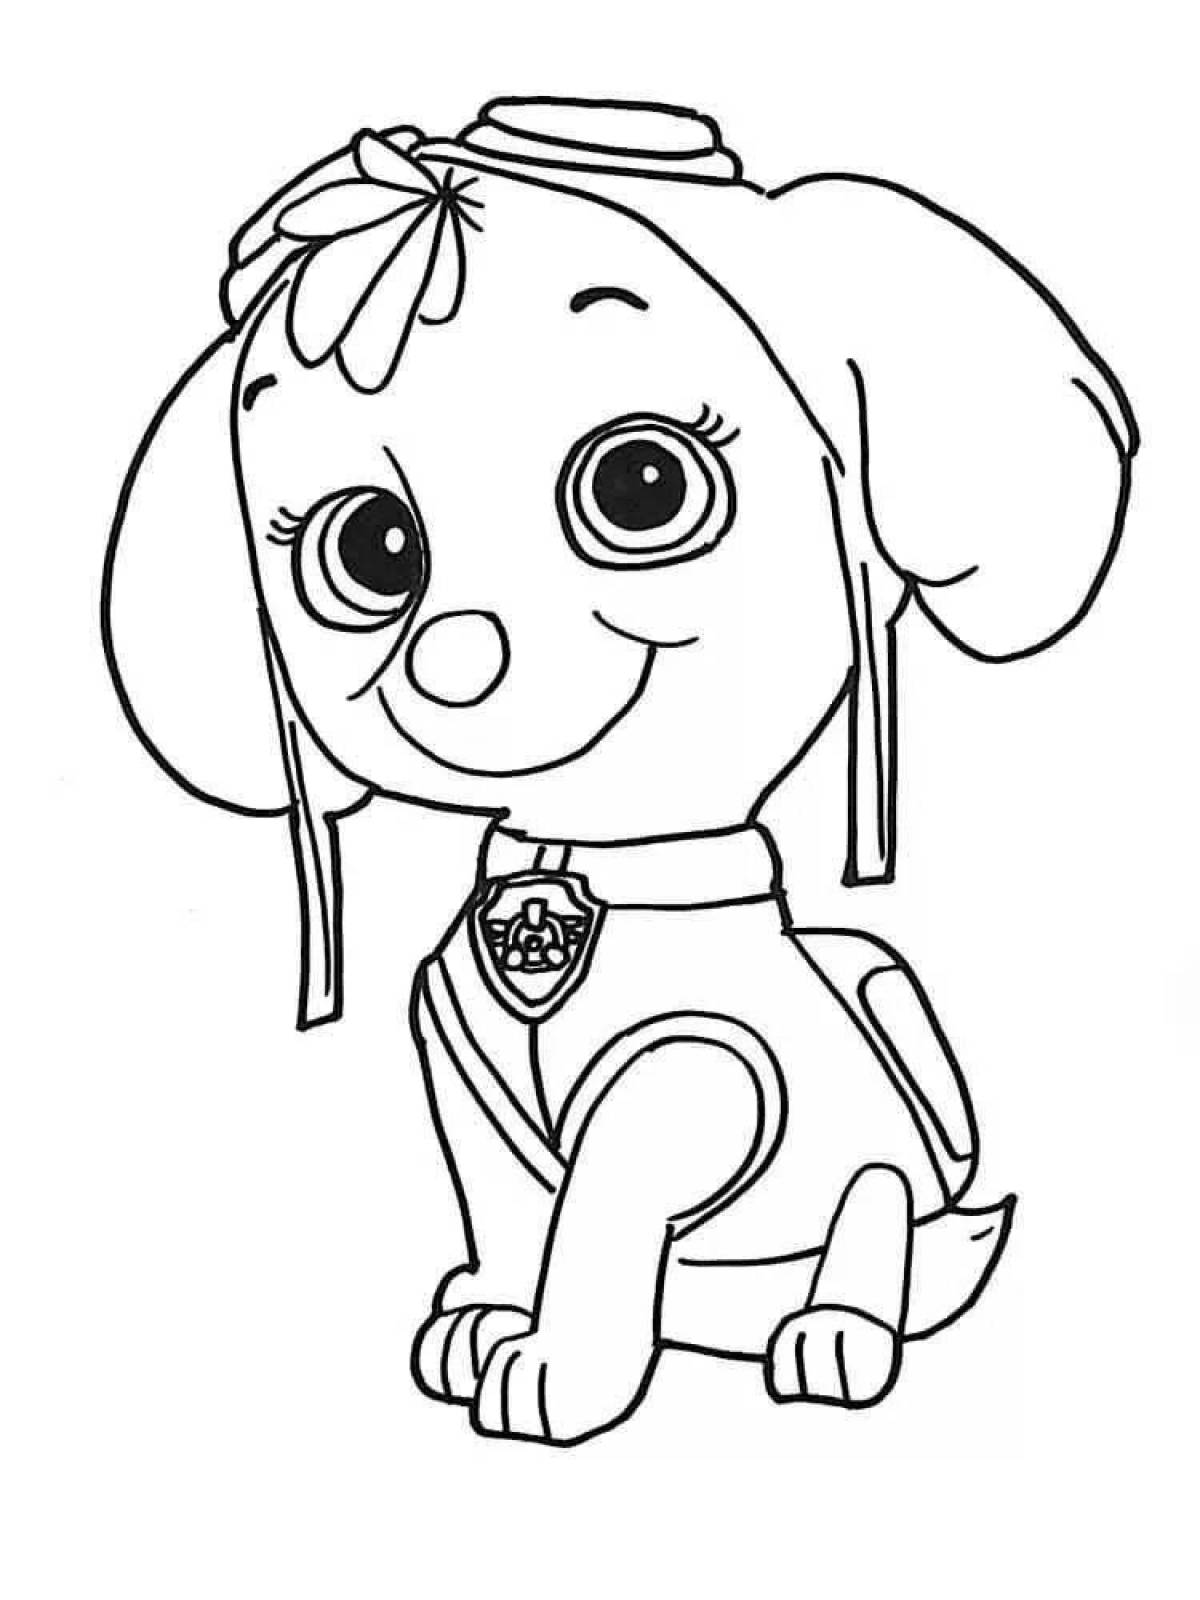 Cute skye puppy coloring page